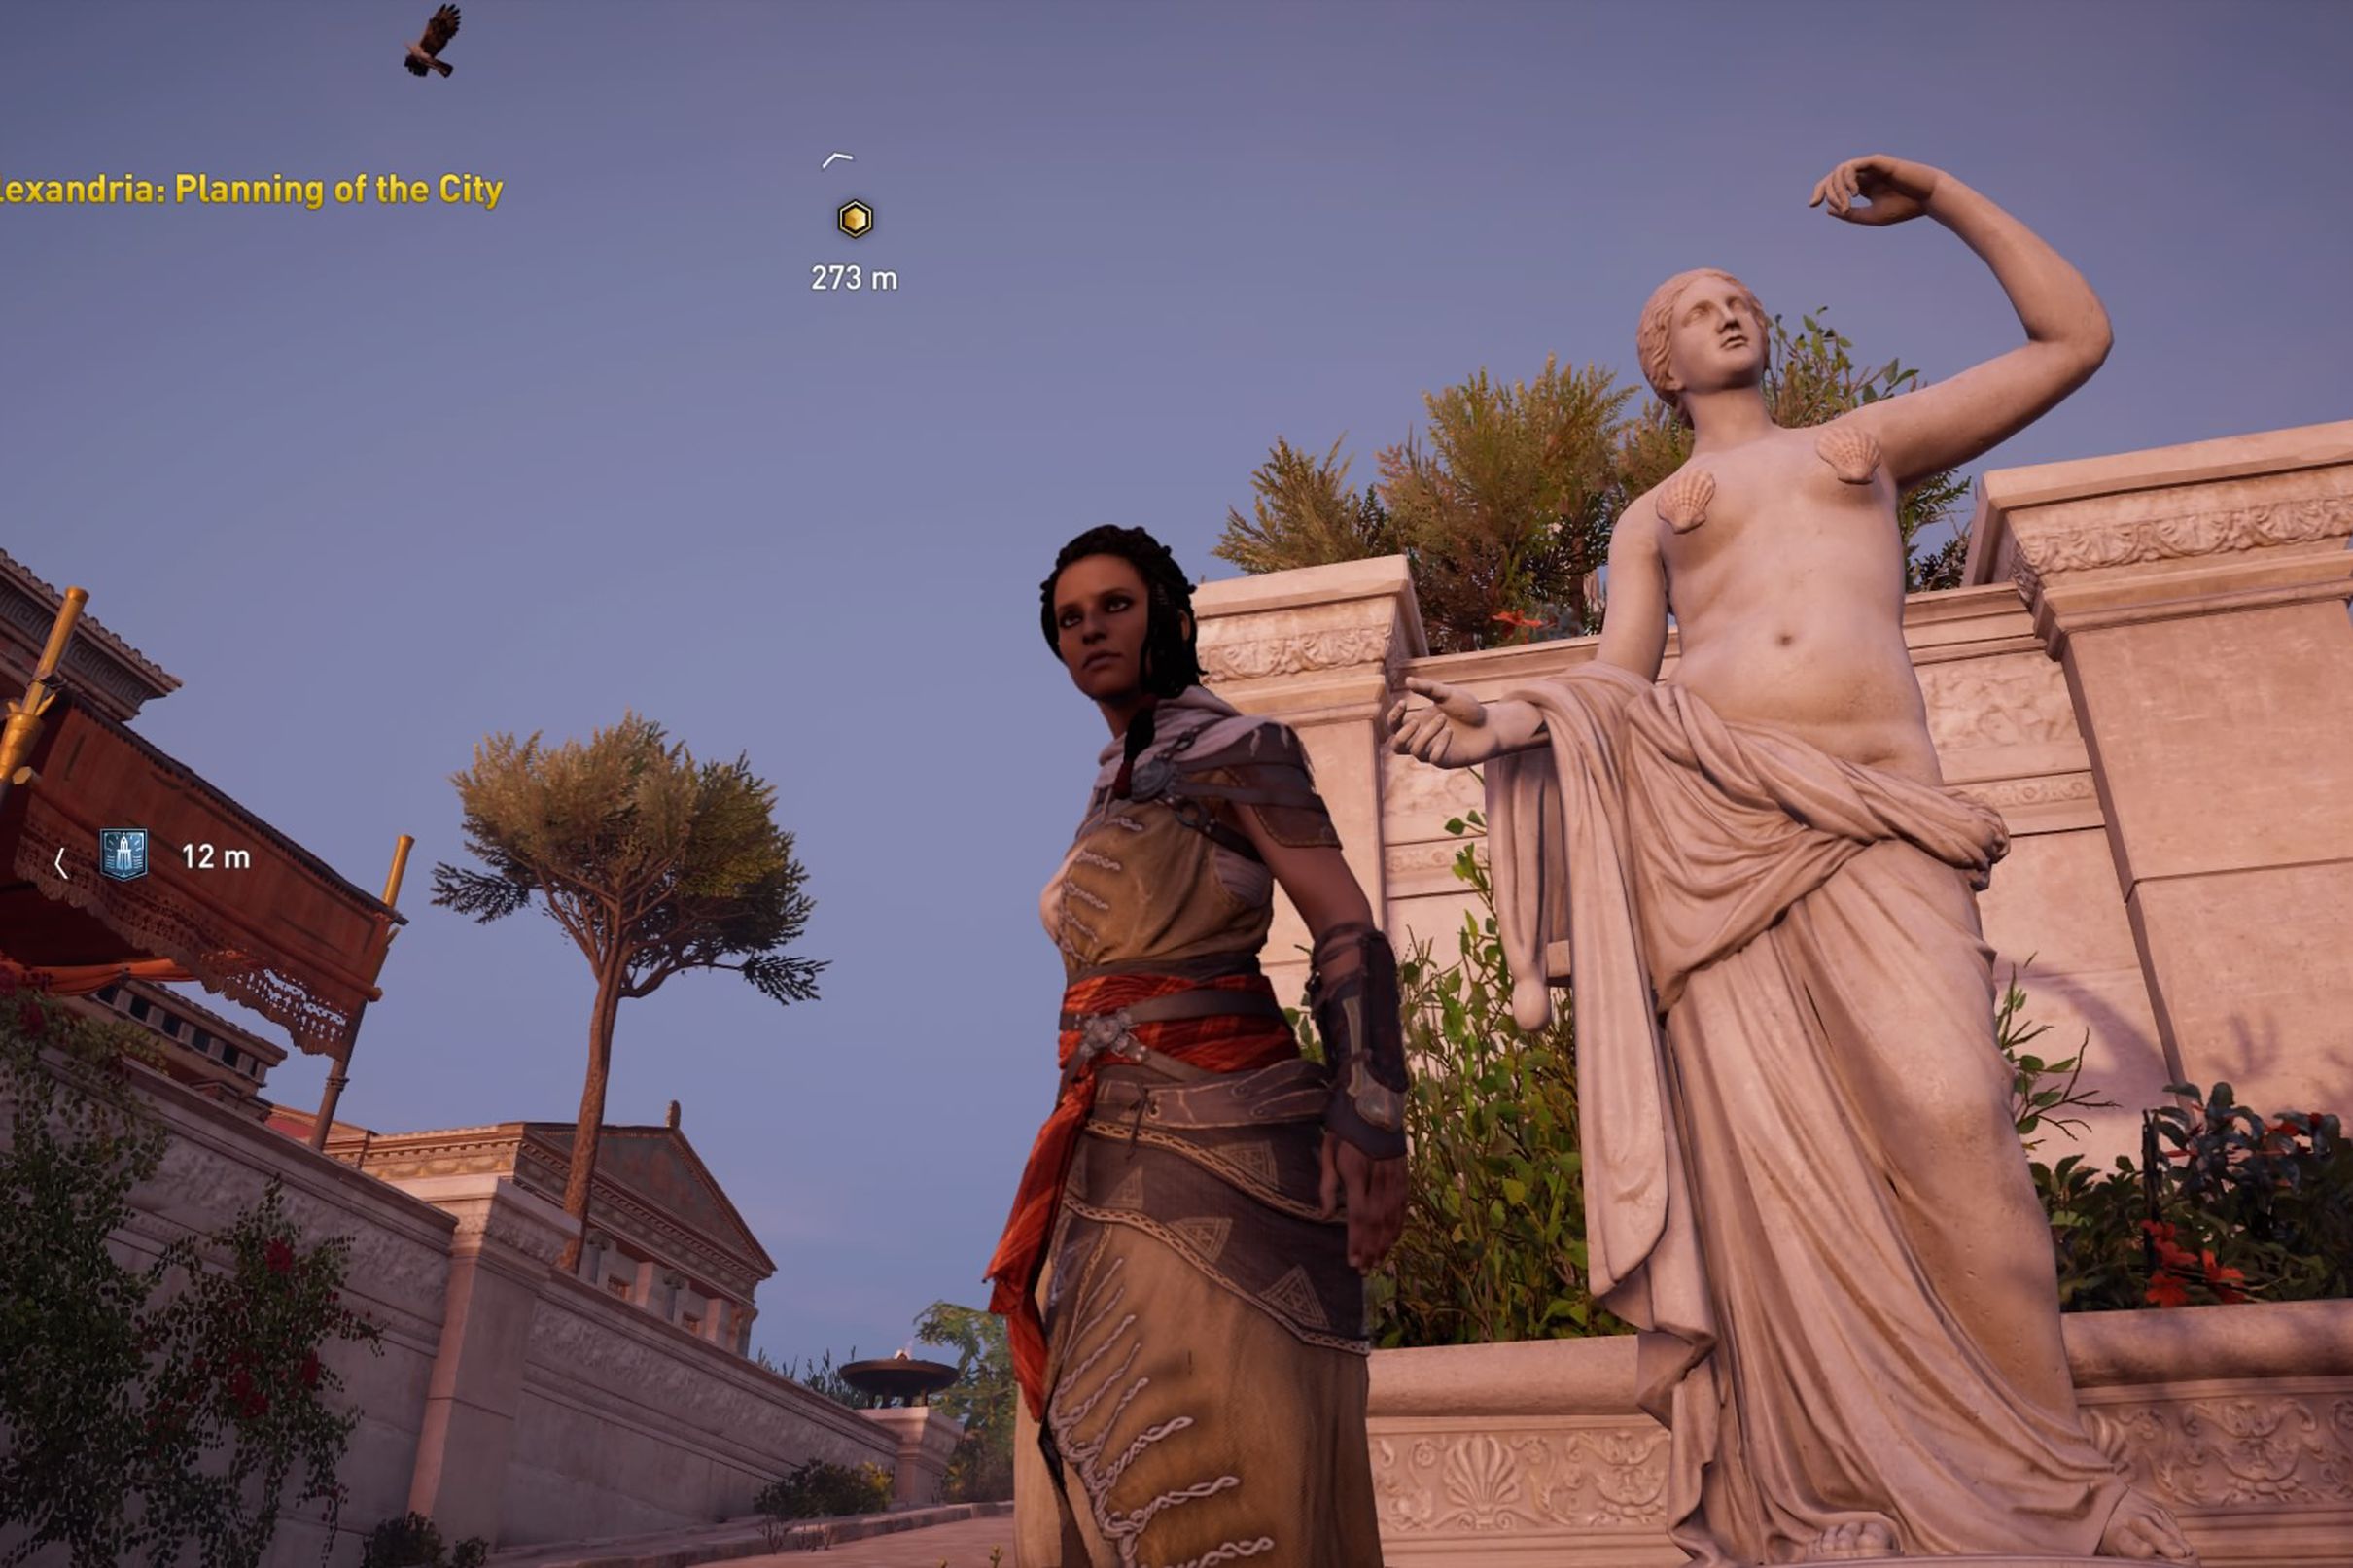 Assassins Creed Origins guided tour mode covers up nude 